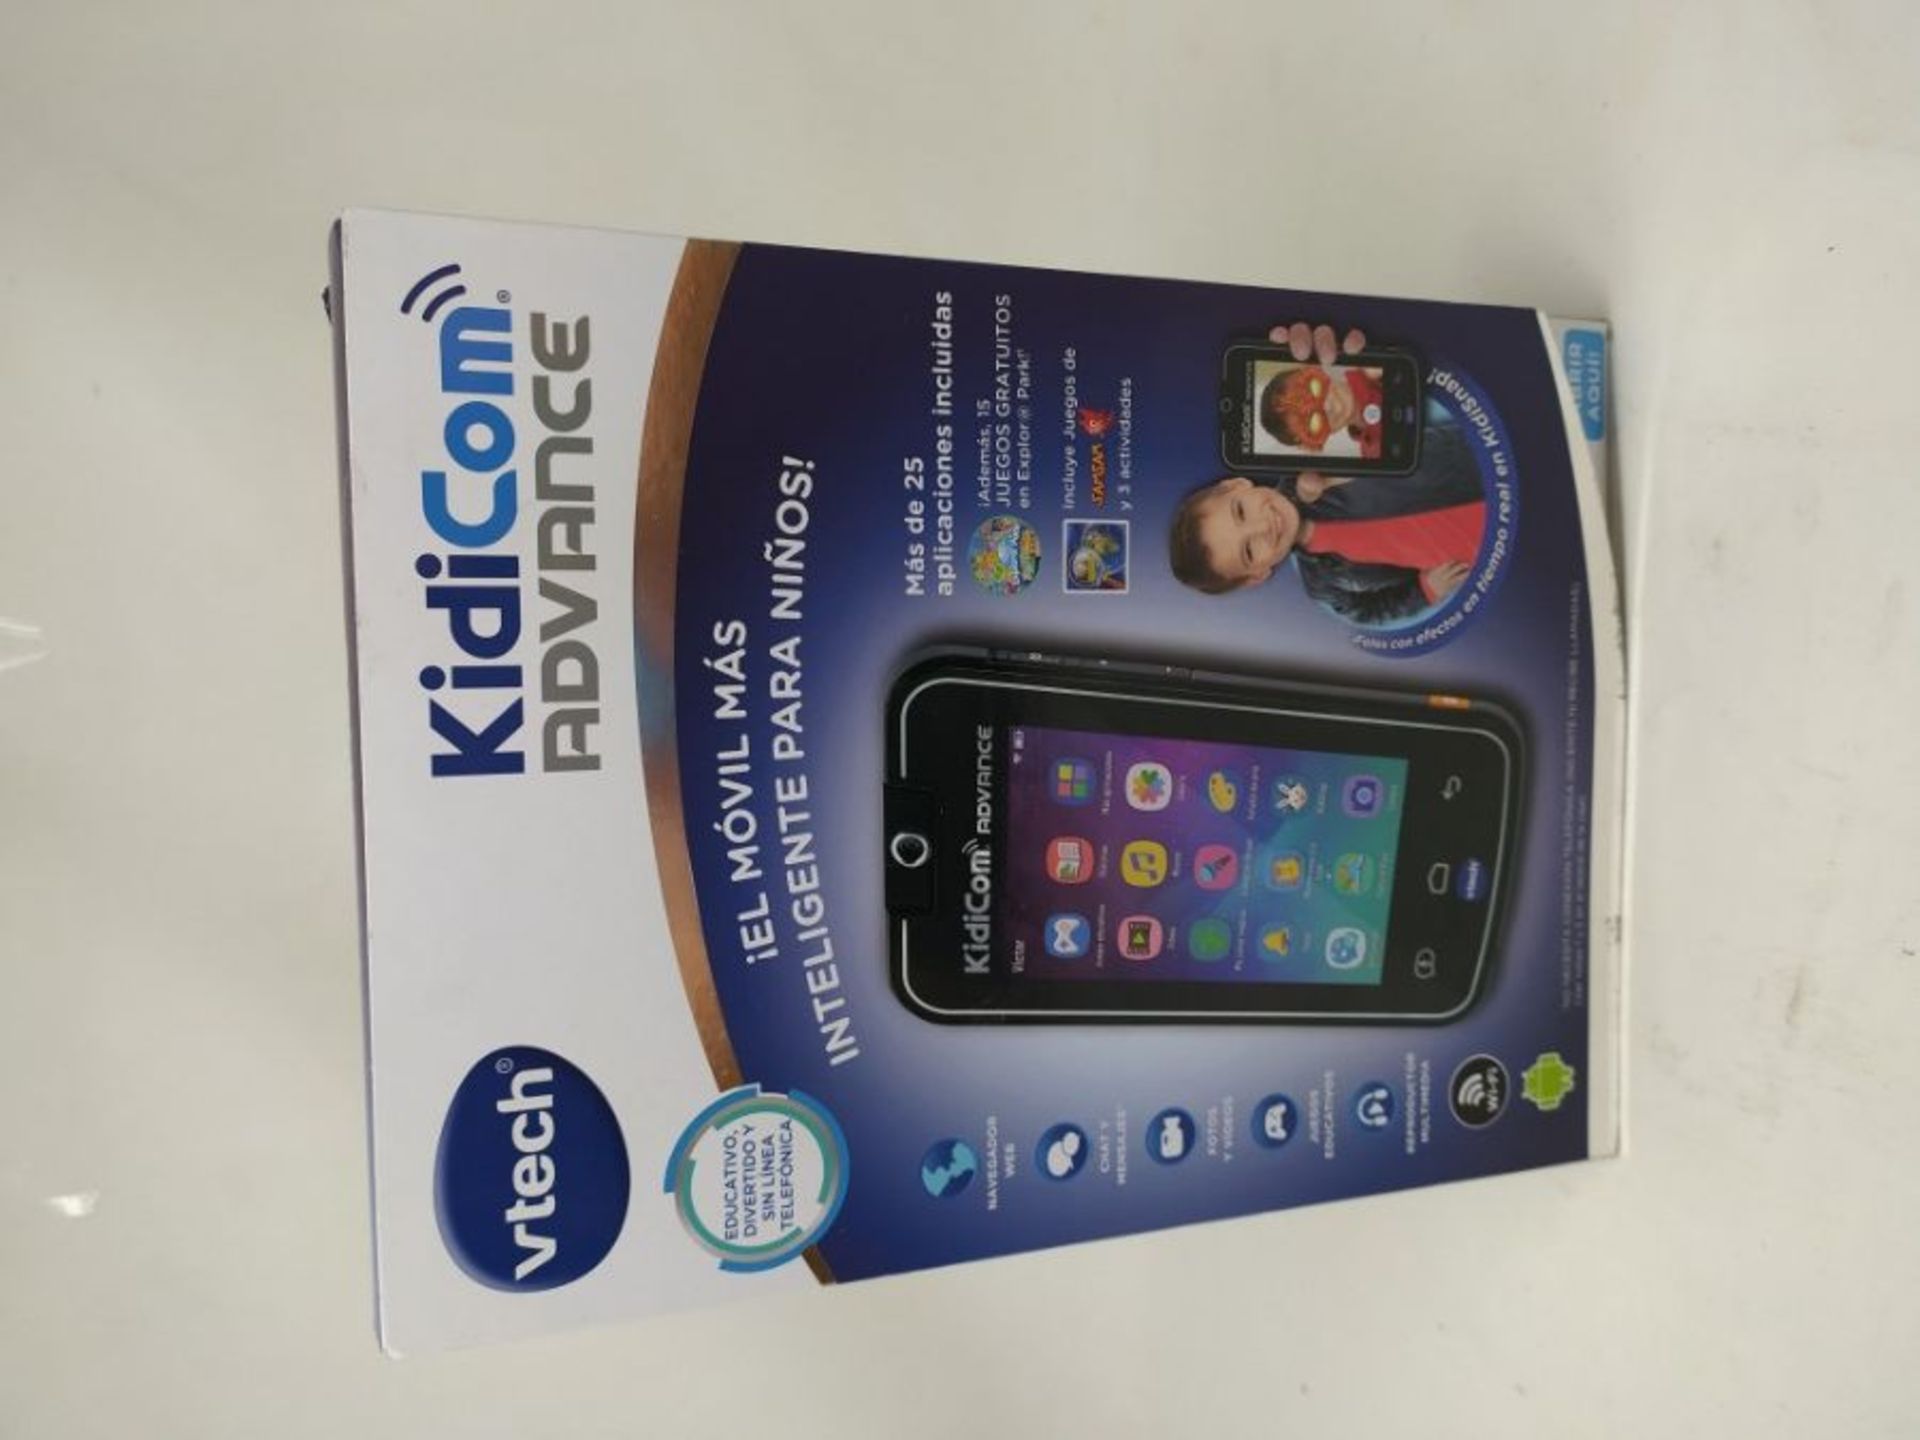 RRP £120.00 VTech - Kidicom Advance Smart Device for Kids, 5" HD Touch Screen, 180° Rotating Lens - Image 2 of 3